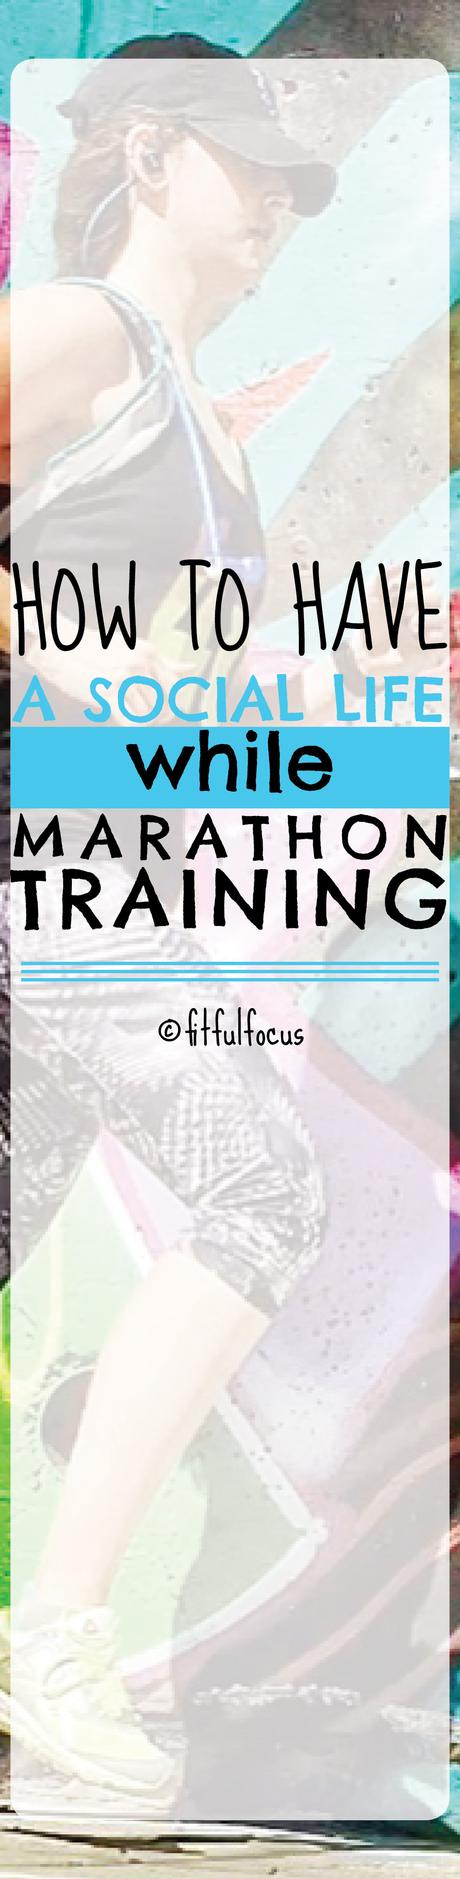 How To Have A Social Life While Marathon Training